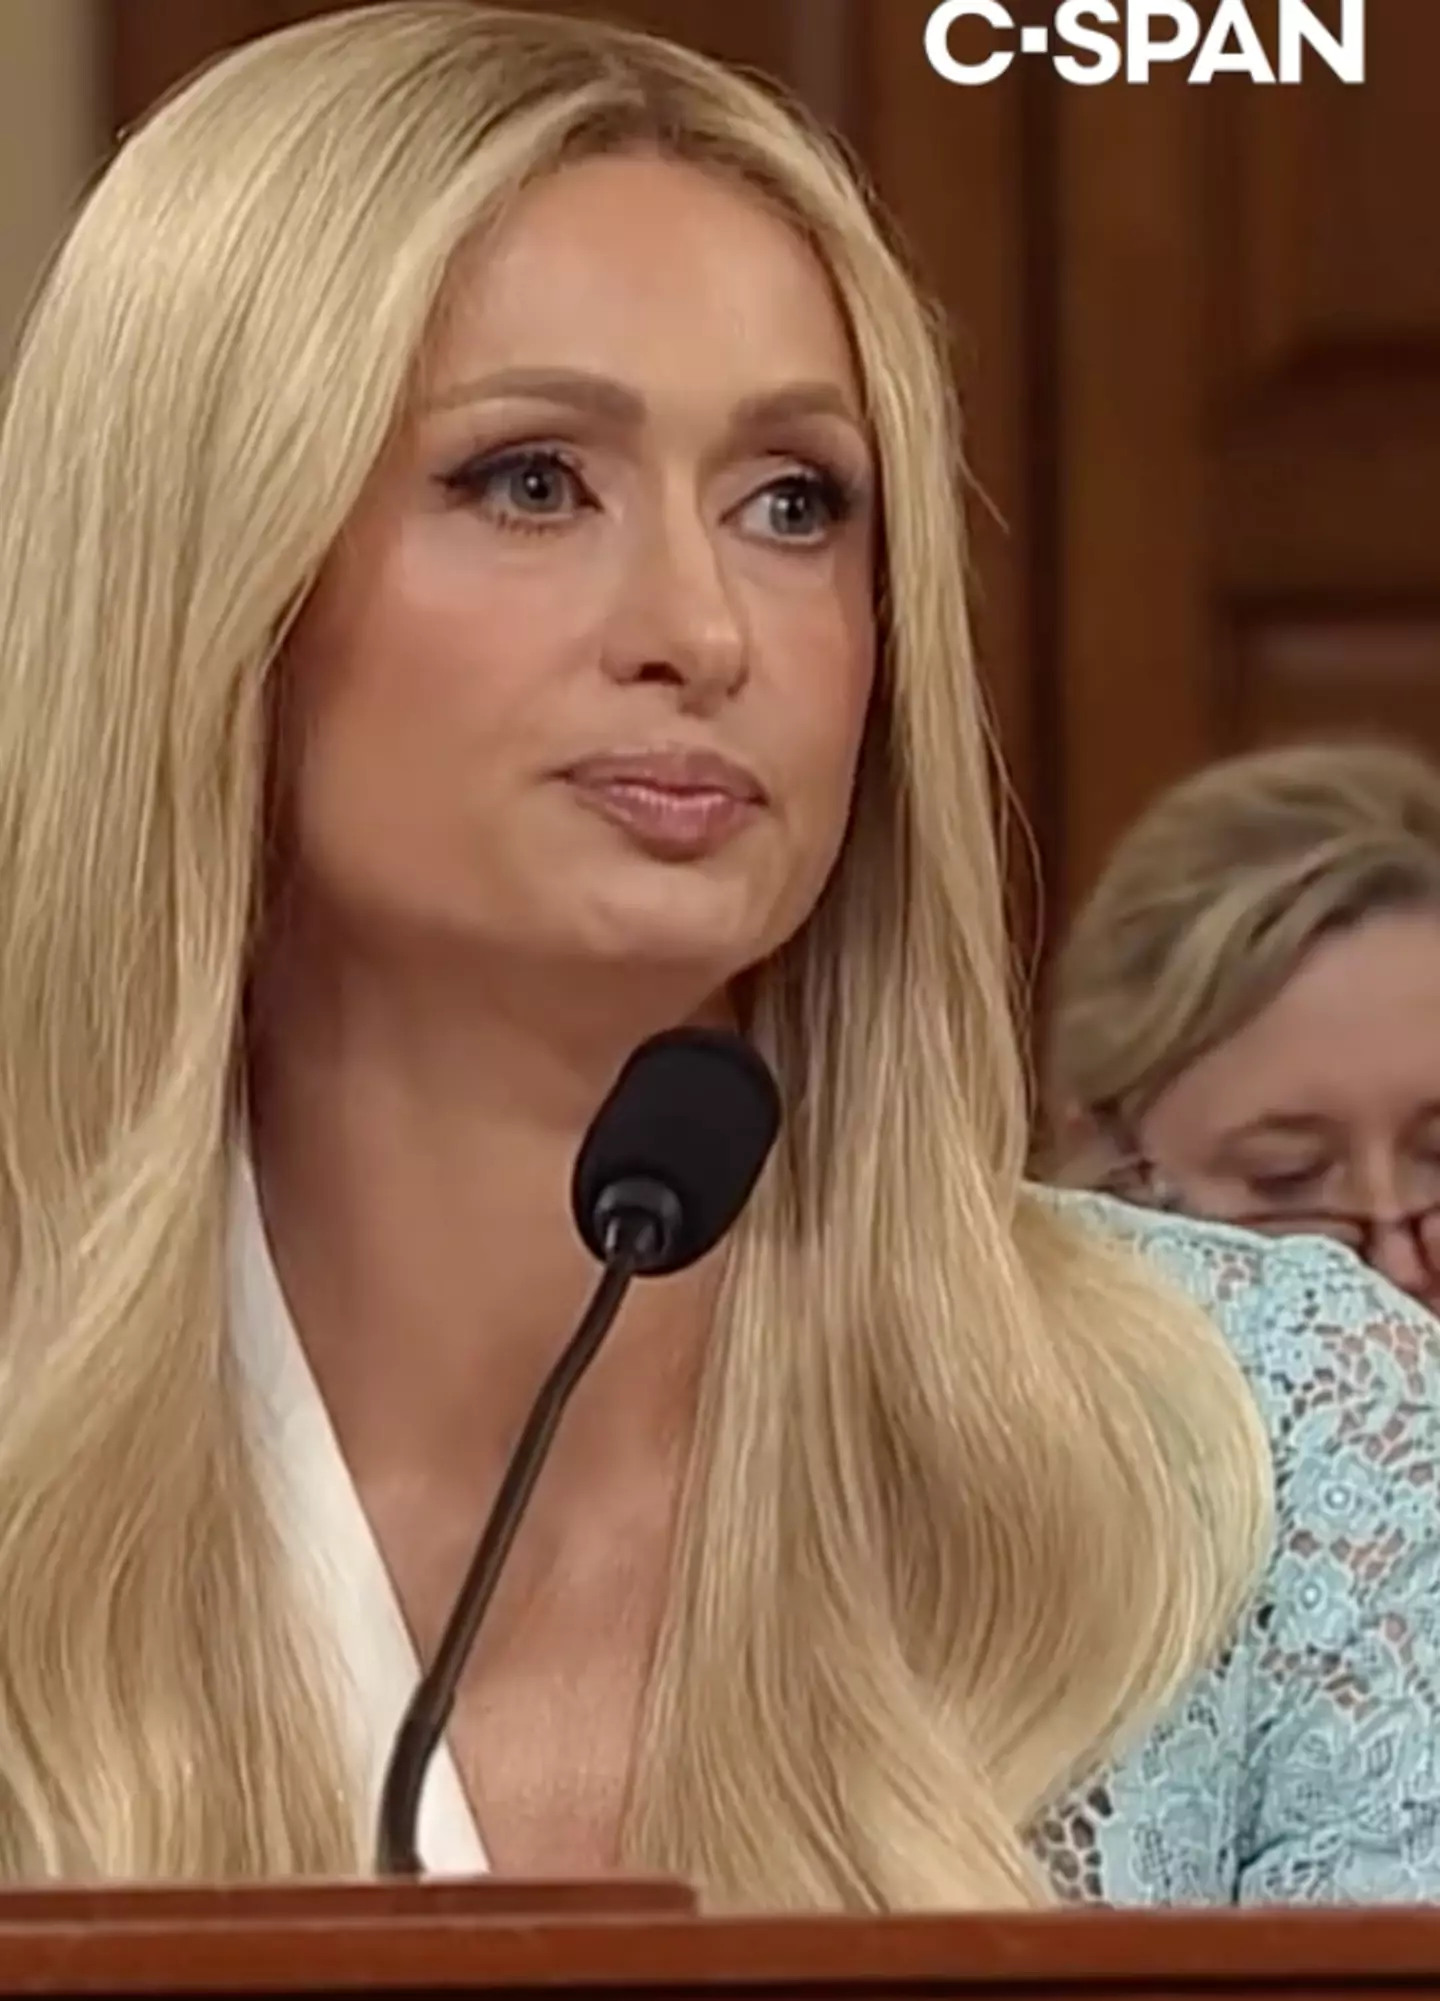 Paris Hilton seemed to switch to her natural voice during a recent speech. (TikTok/@cspanofficial)